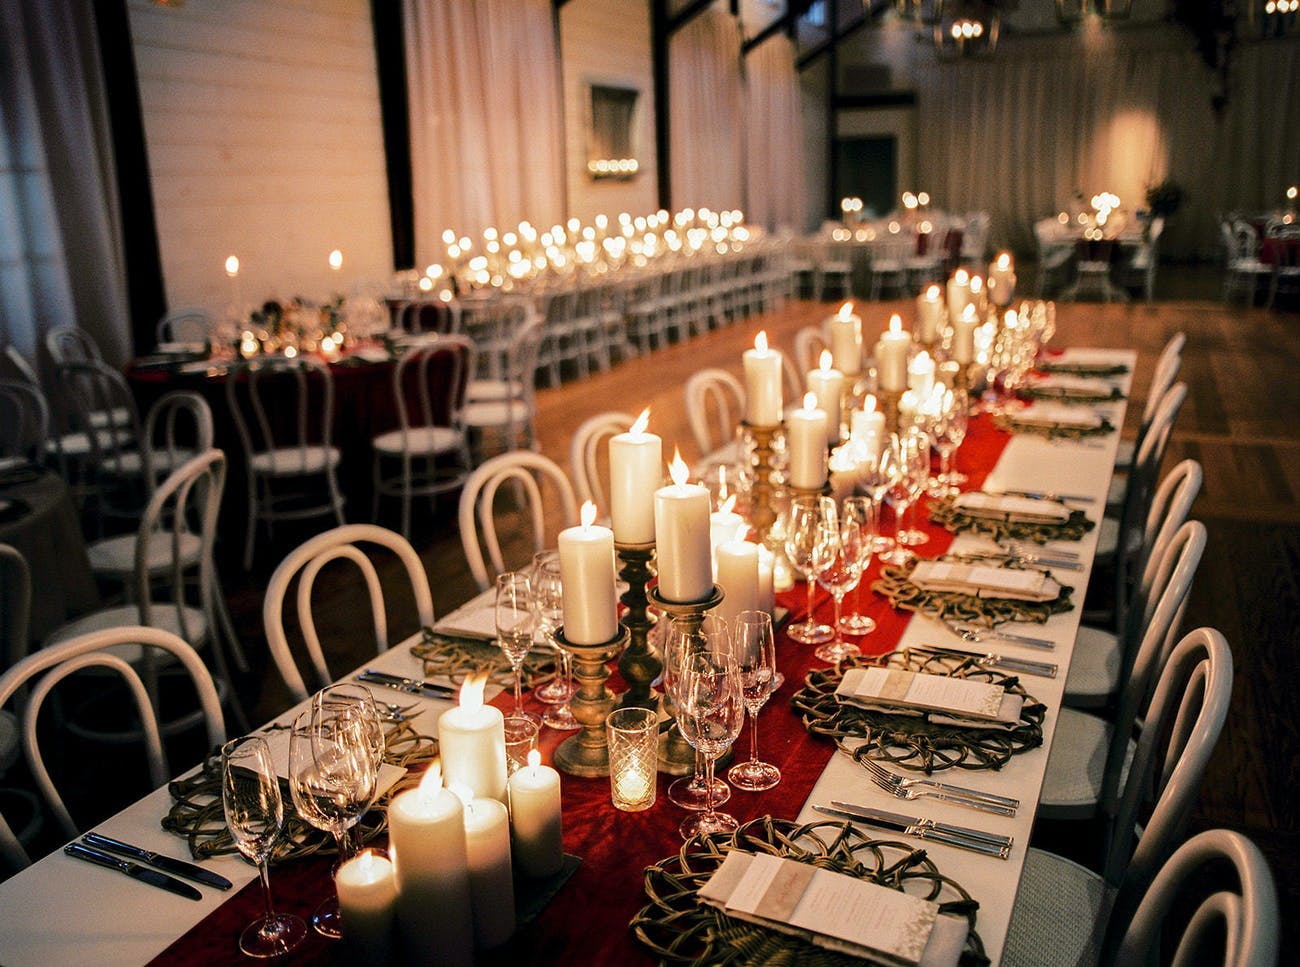 Rustic wedding reception table with candlelight and crimson table runner.